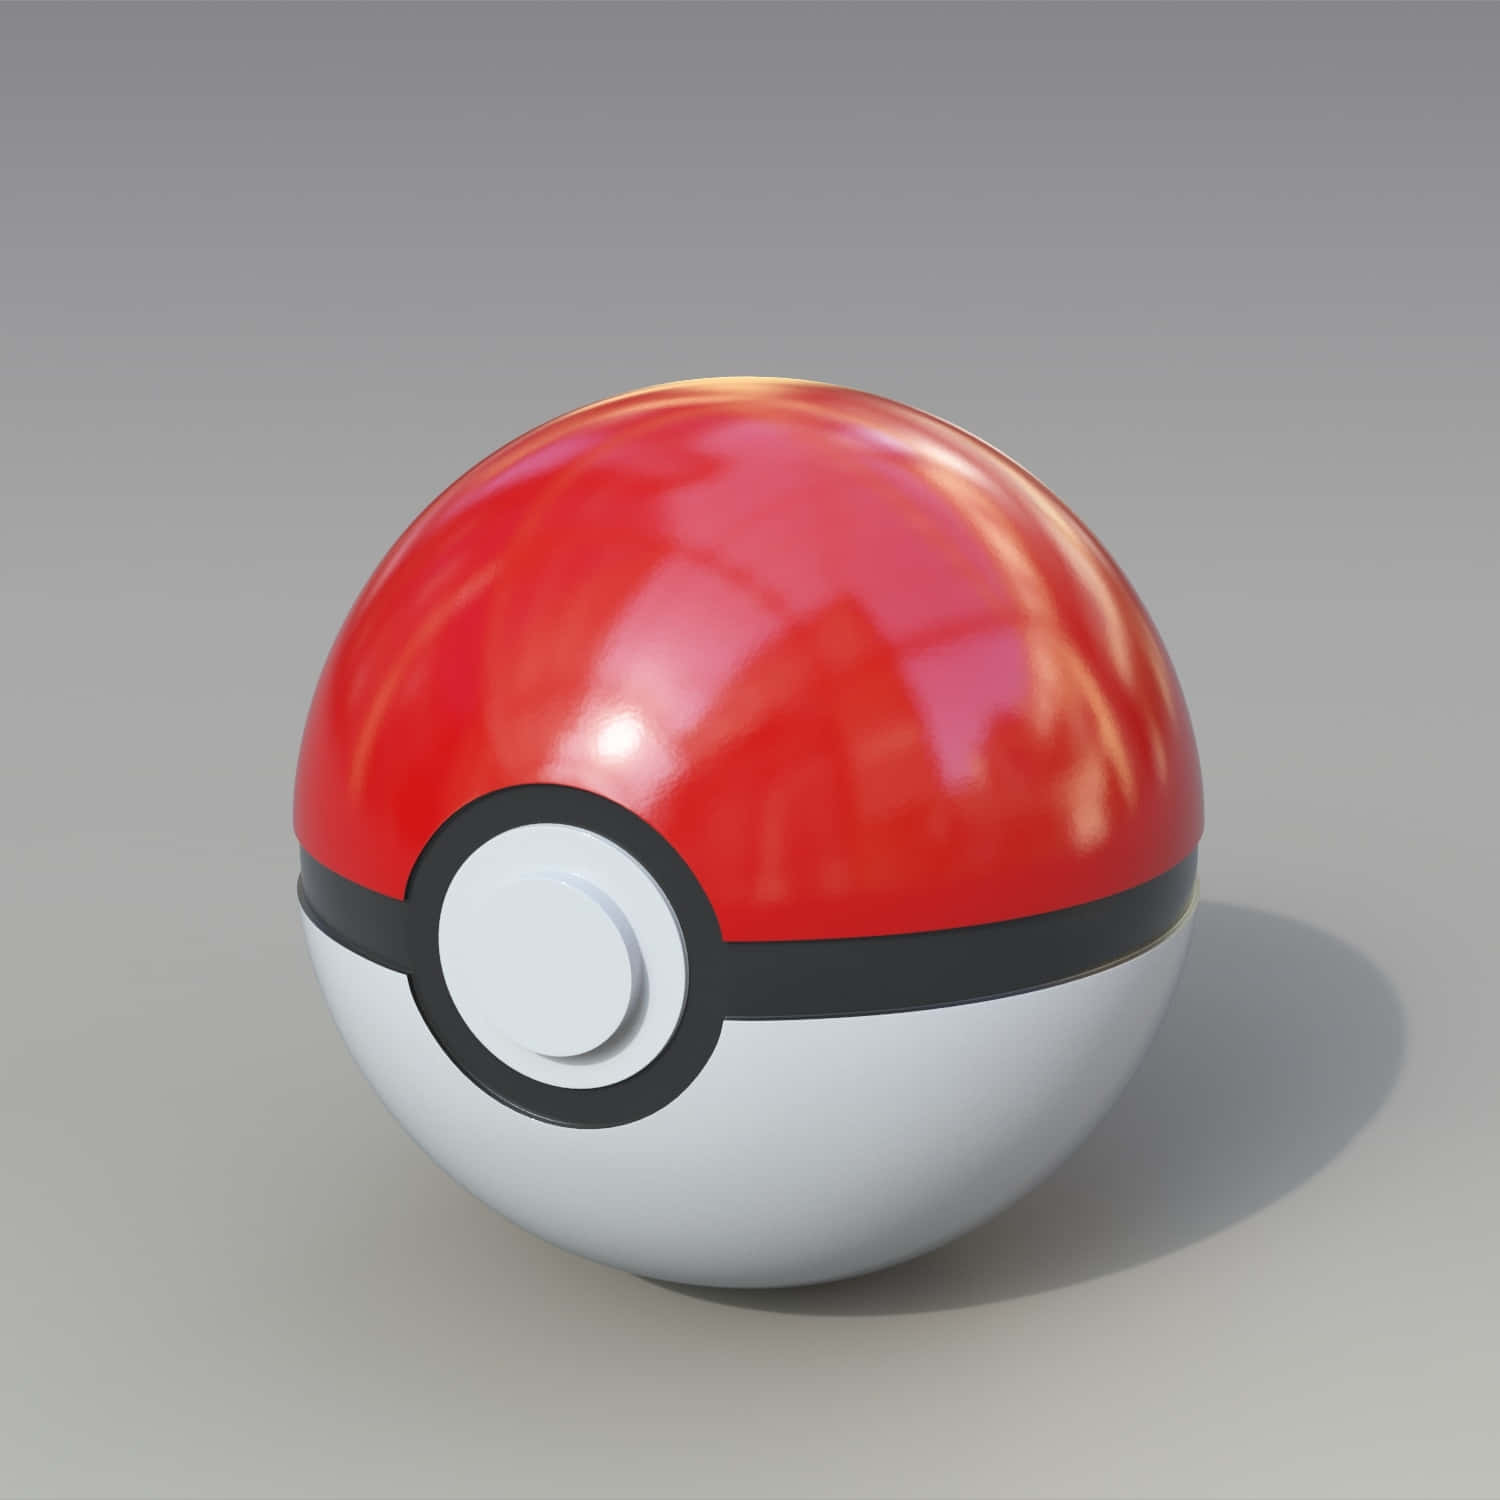 Catch 'em all with the classic Pokeball